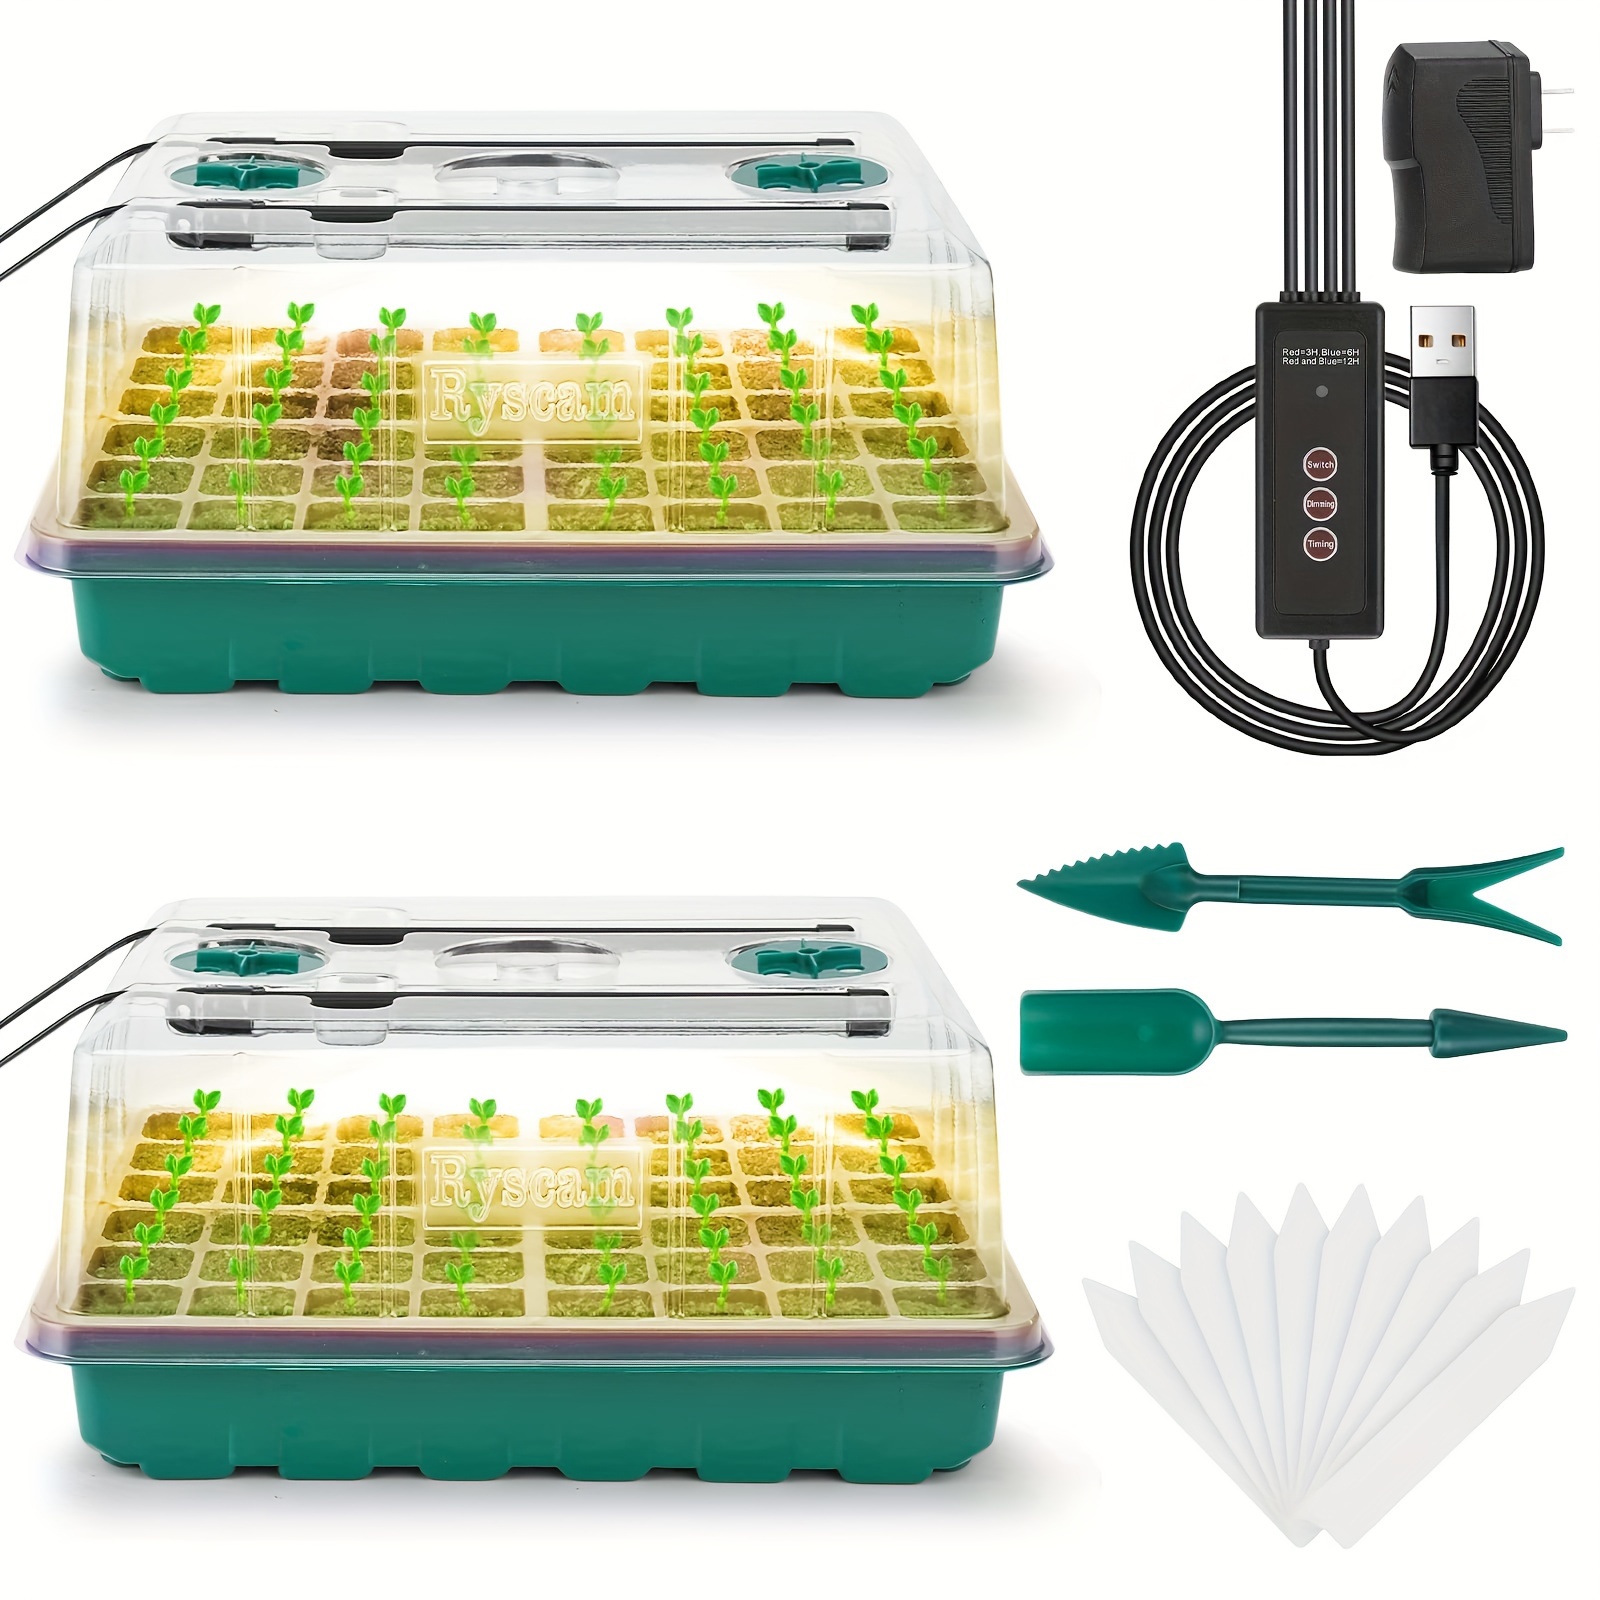 

1pc/2pcs/4pcs Seed Starter Tray With Grow Light, Seed Starter Kit, Seedling Starter Trays With Humidity Domes, Automatic Timer, Adjustable Light Indoor Gardening Plant Germination Trays